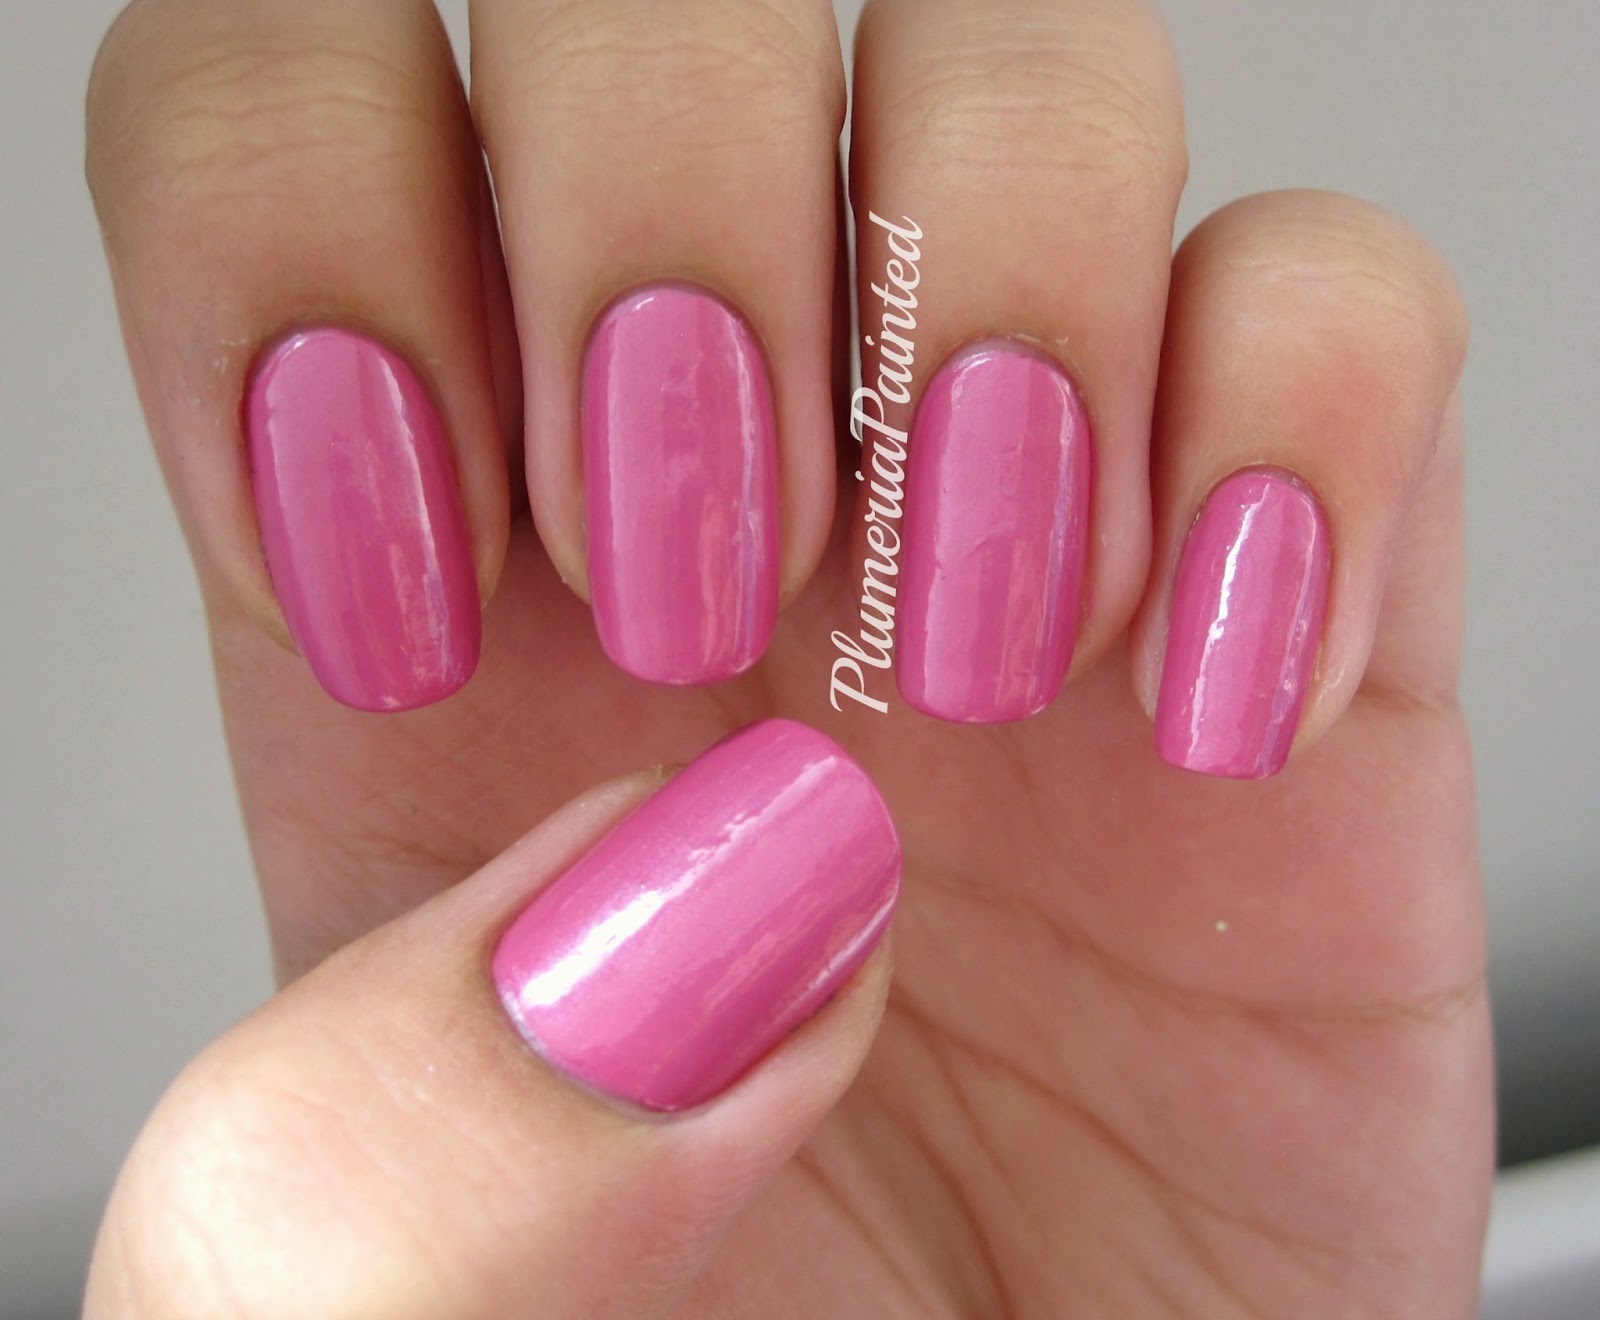 2. OPI To Be Perfectly Honest Nail Lacquer - wide 2